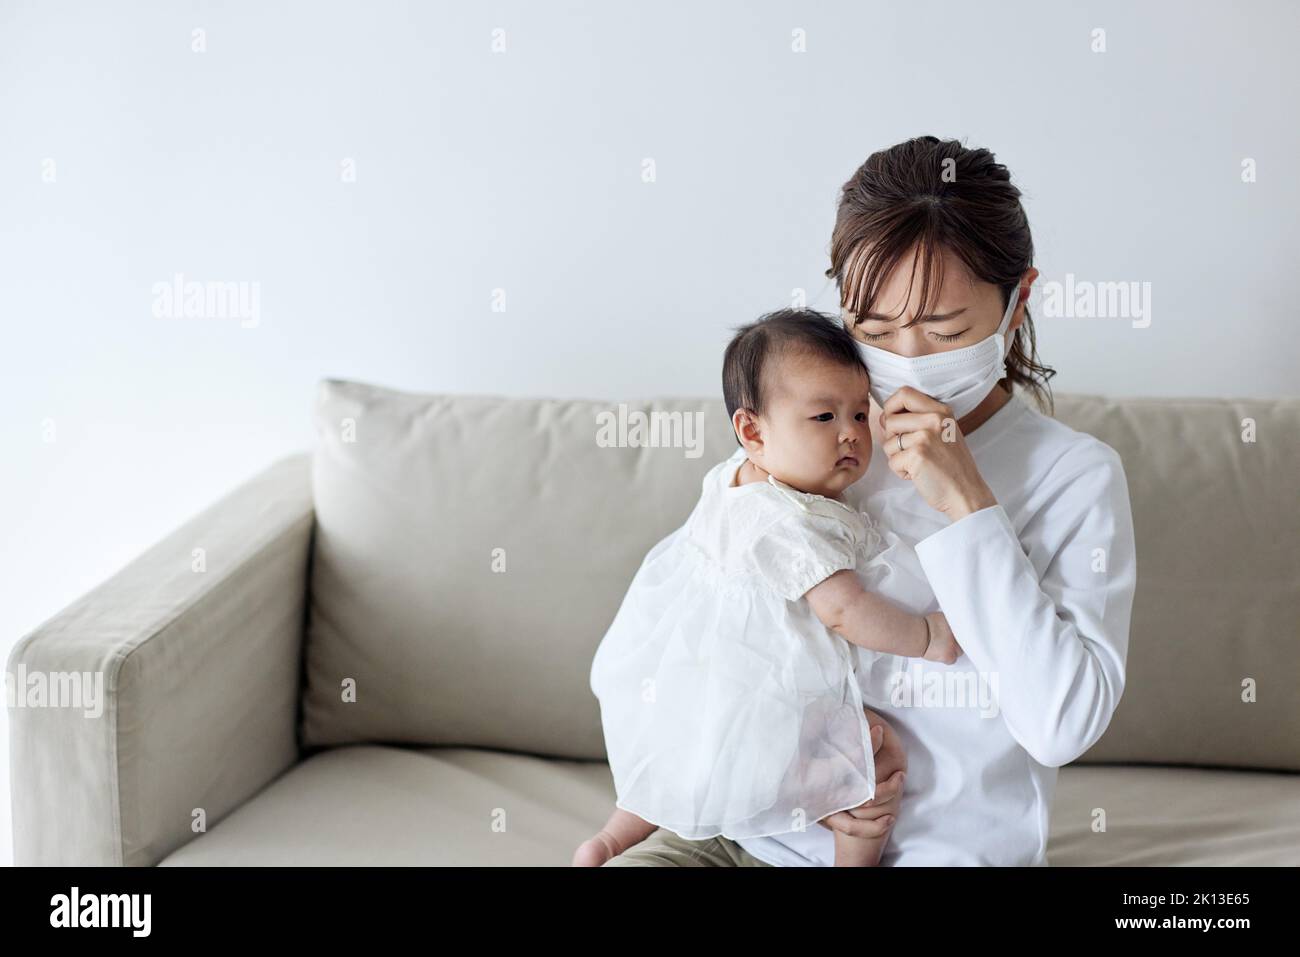 Japanese newborn with mother Stock Photo